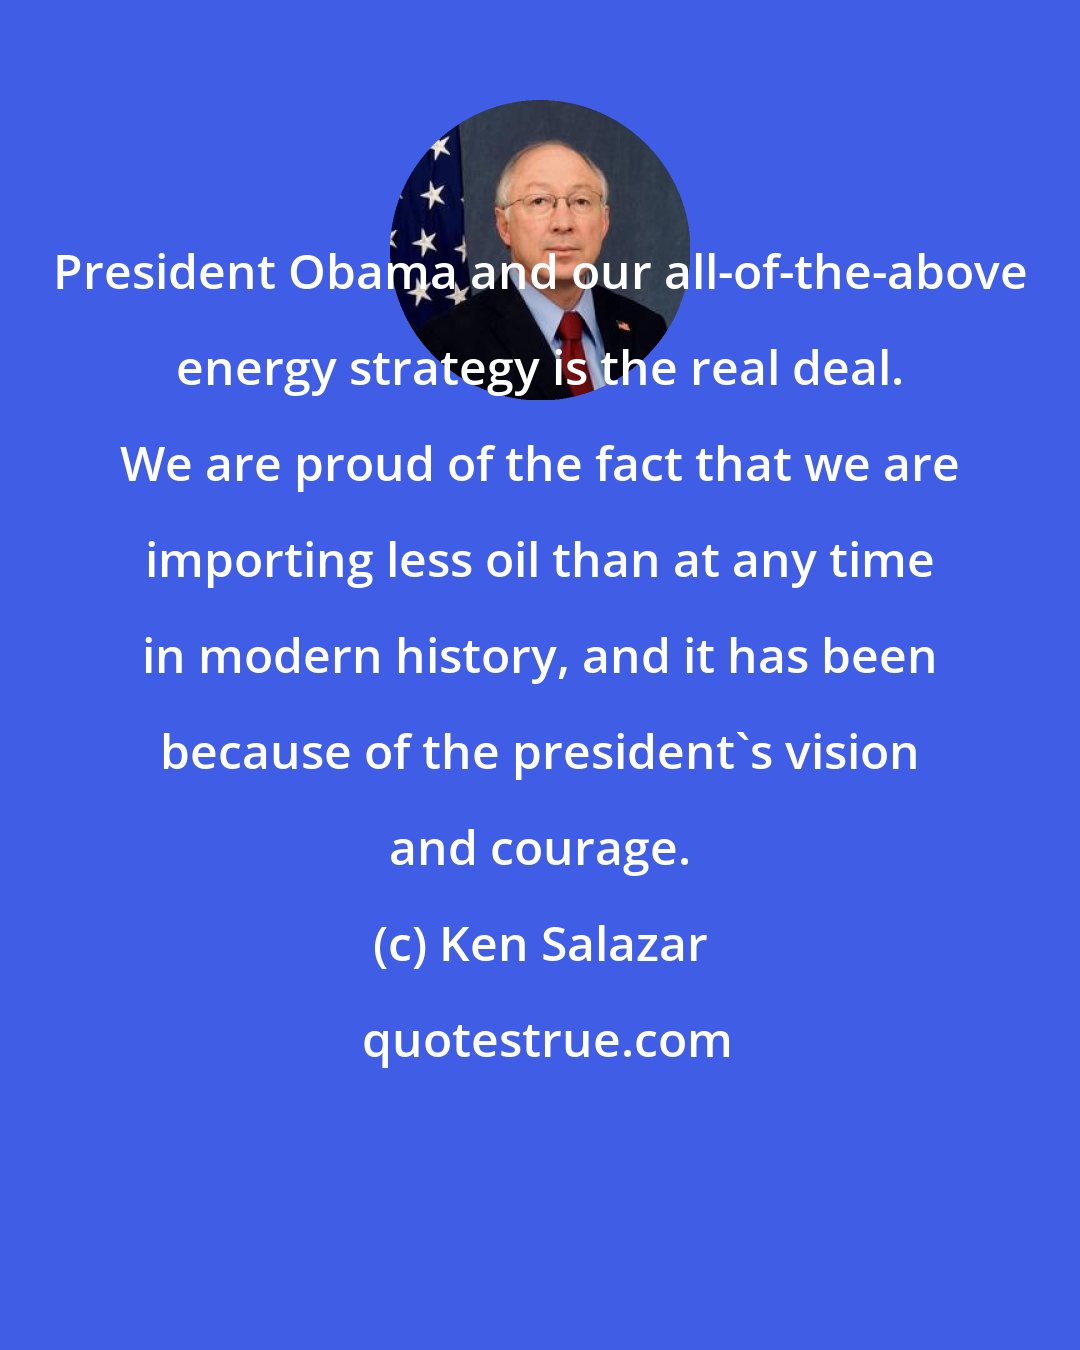 Ken Salazar: President Obama and our all-of-the-above energy strategy is the real deal. We are proud of the fact that we are importing less oil than at any time in modern history, and it has been because of the president's vision and courage.